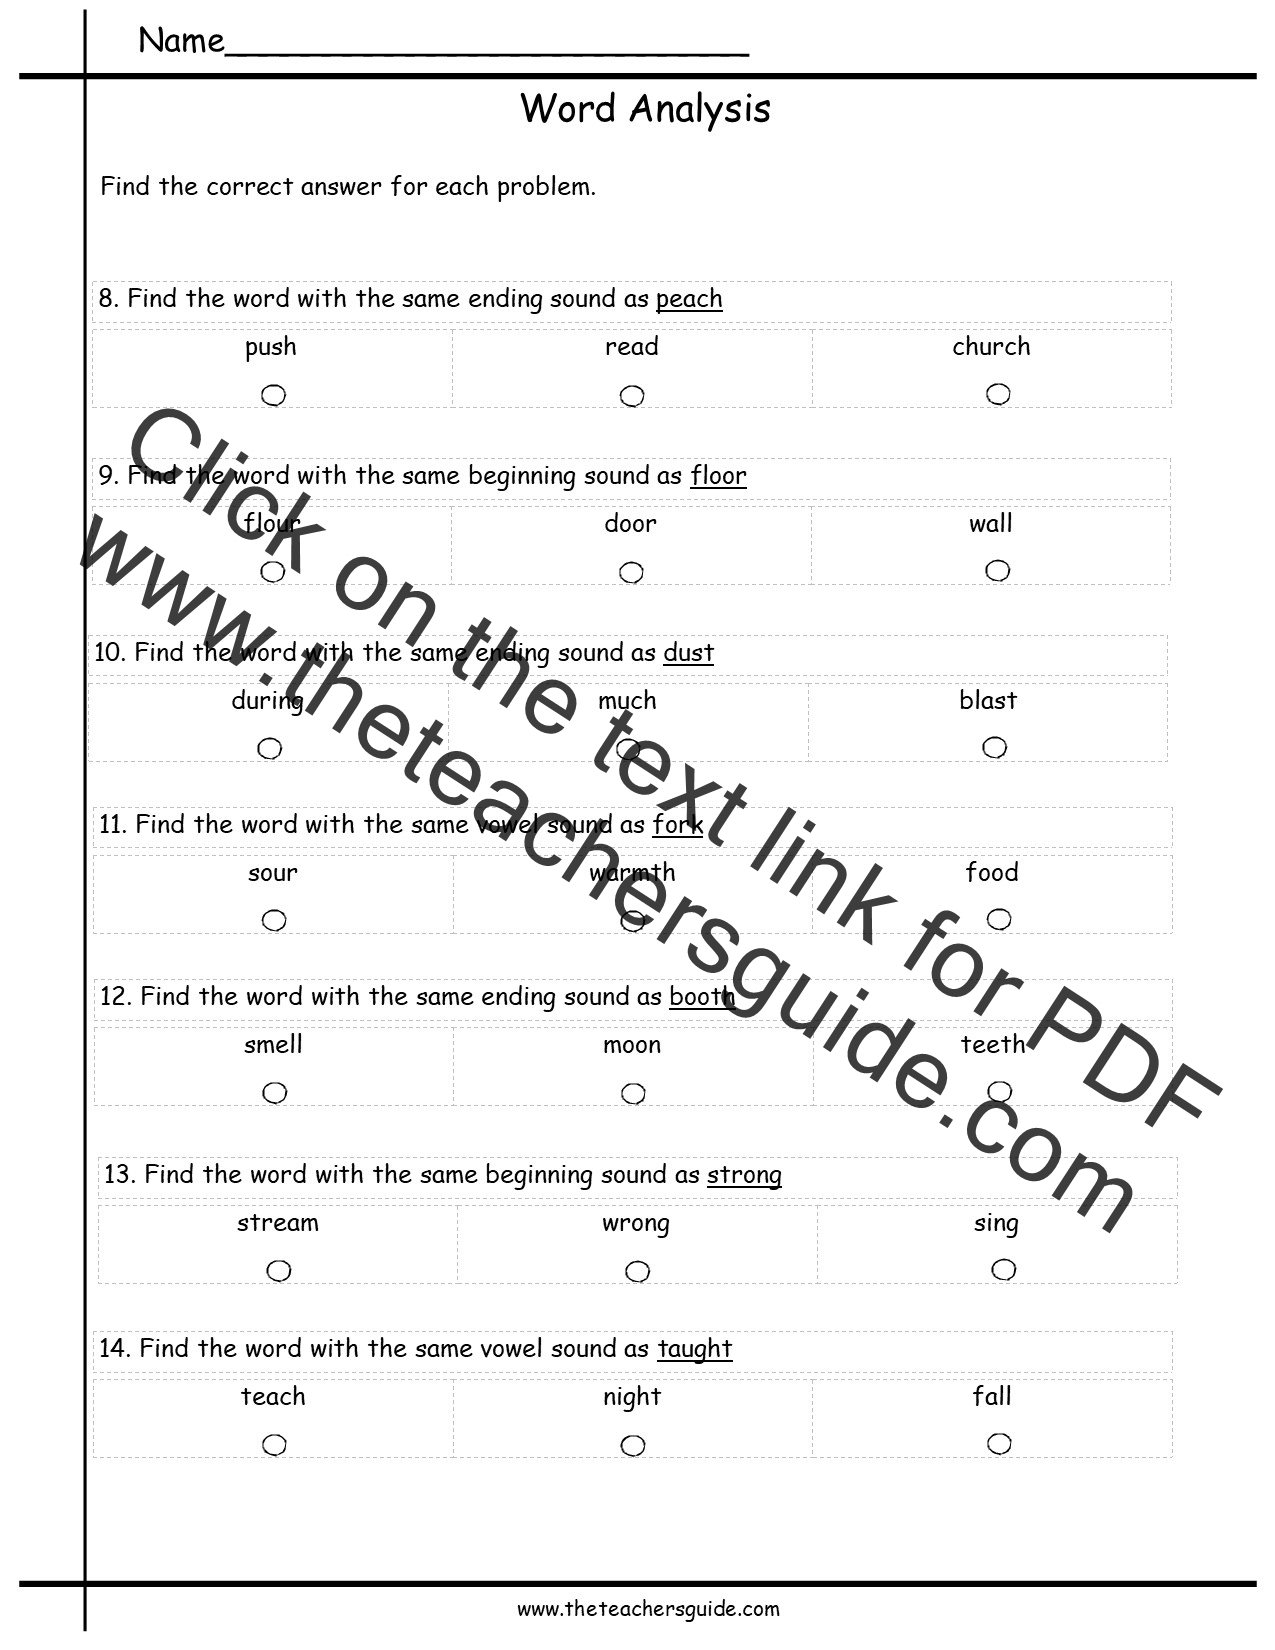 Teaching the /AW/ Sound and a Free Word List - The Productive Teacher